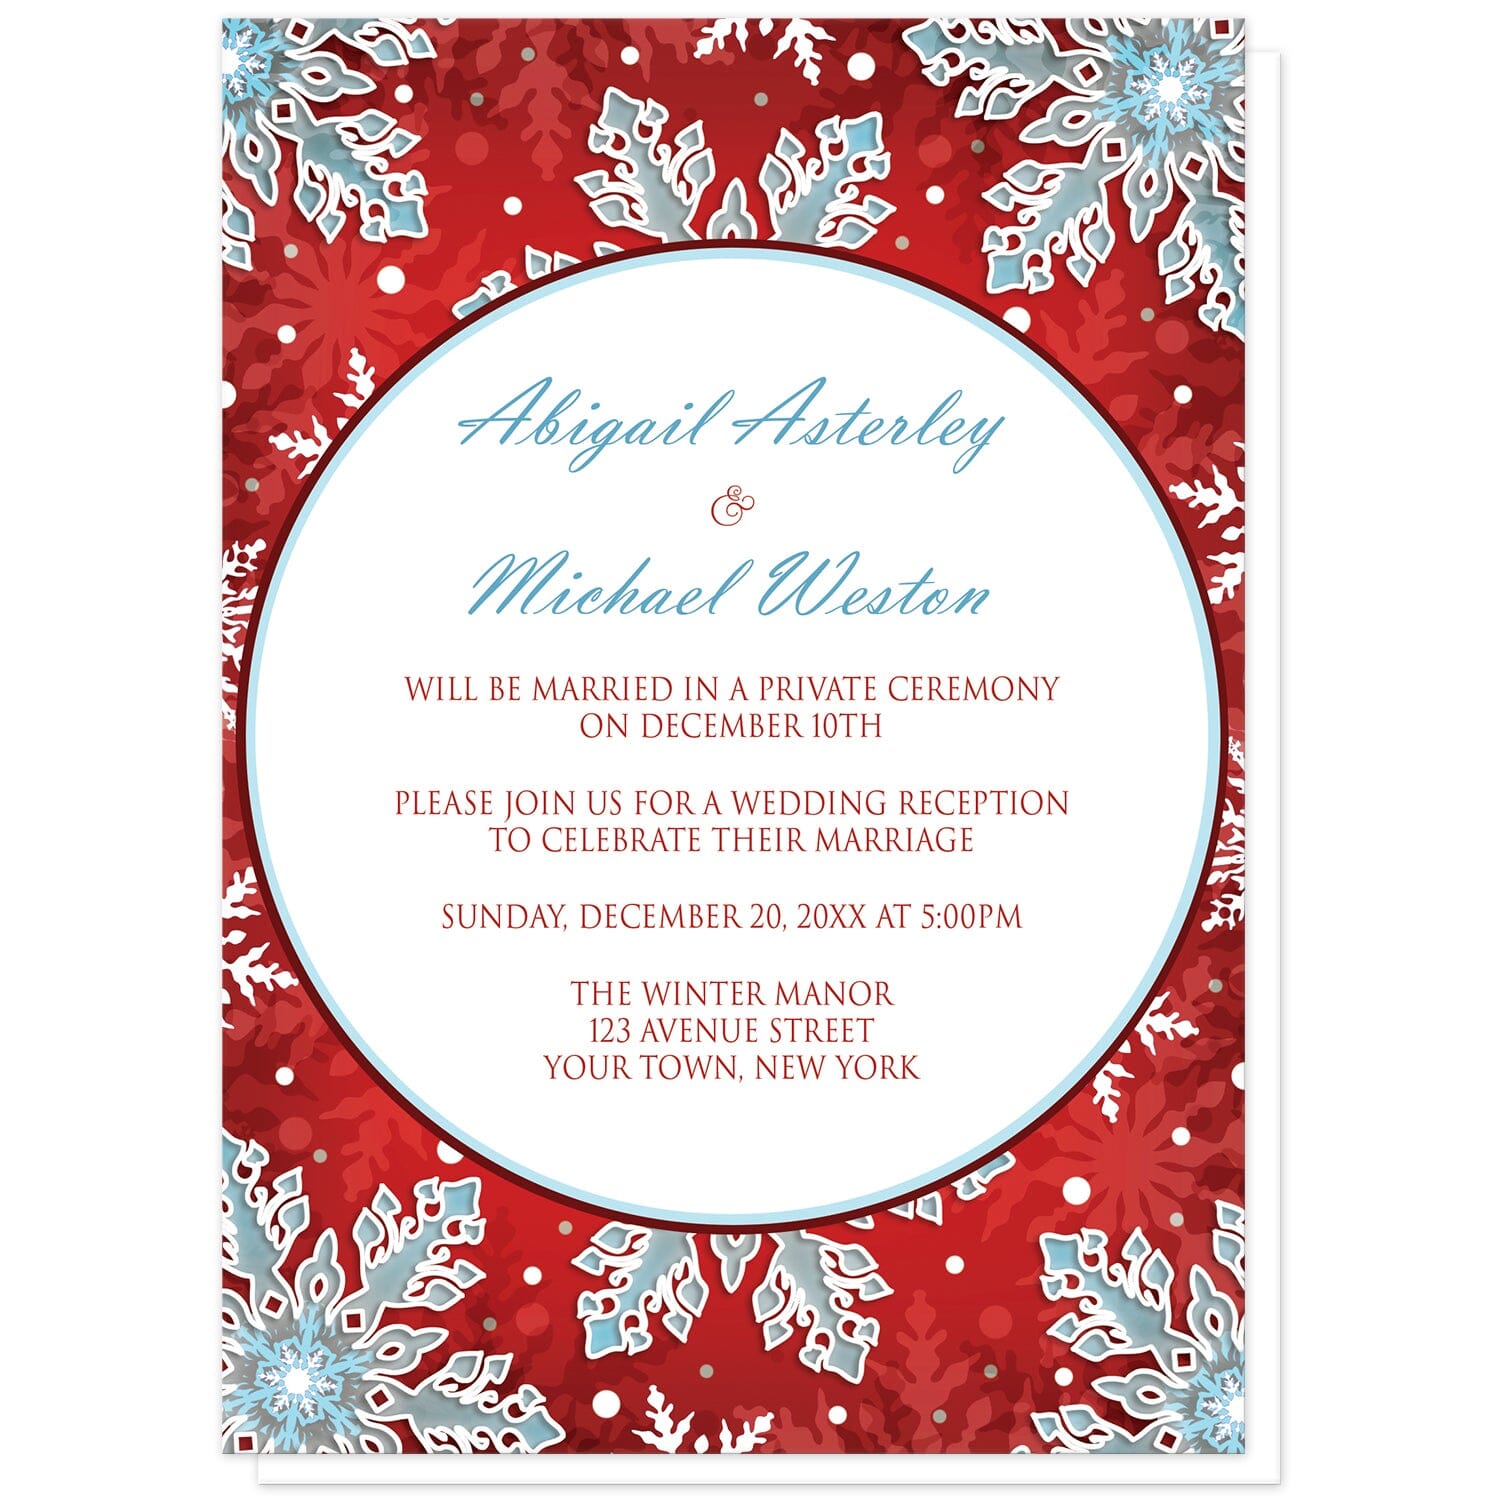 Modern Red White Blue Snowflake Reception Only Invitations at Artistically Invited. Modern red white blue snowflake reception only invitations with your personalized post-wedding reception details custom printed in blue and purple in a white circle over a royal red background covered in ornate white and blue snowflakes.